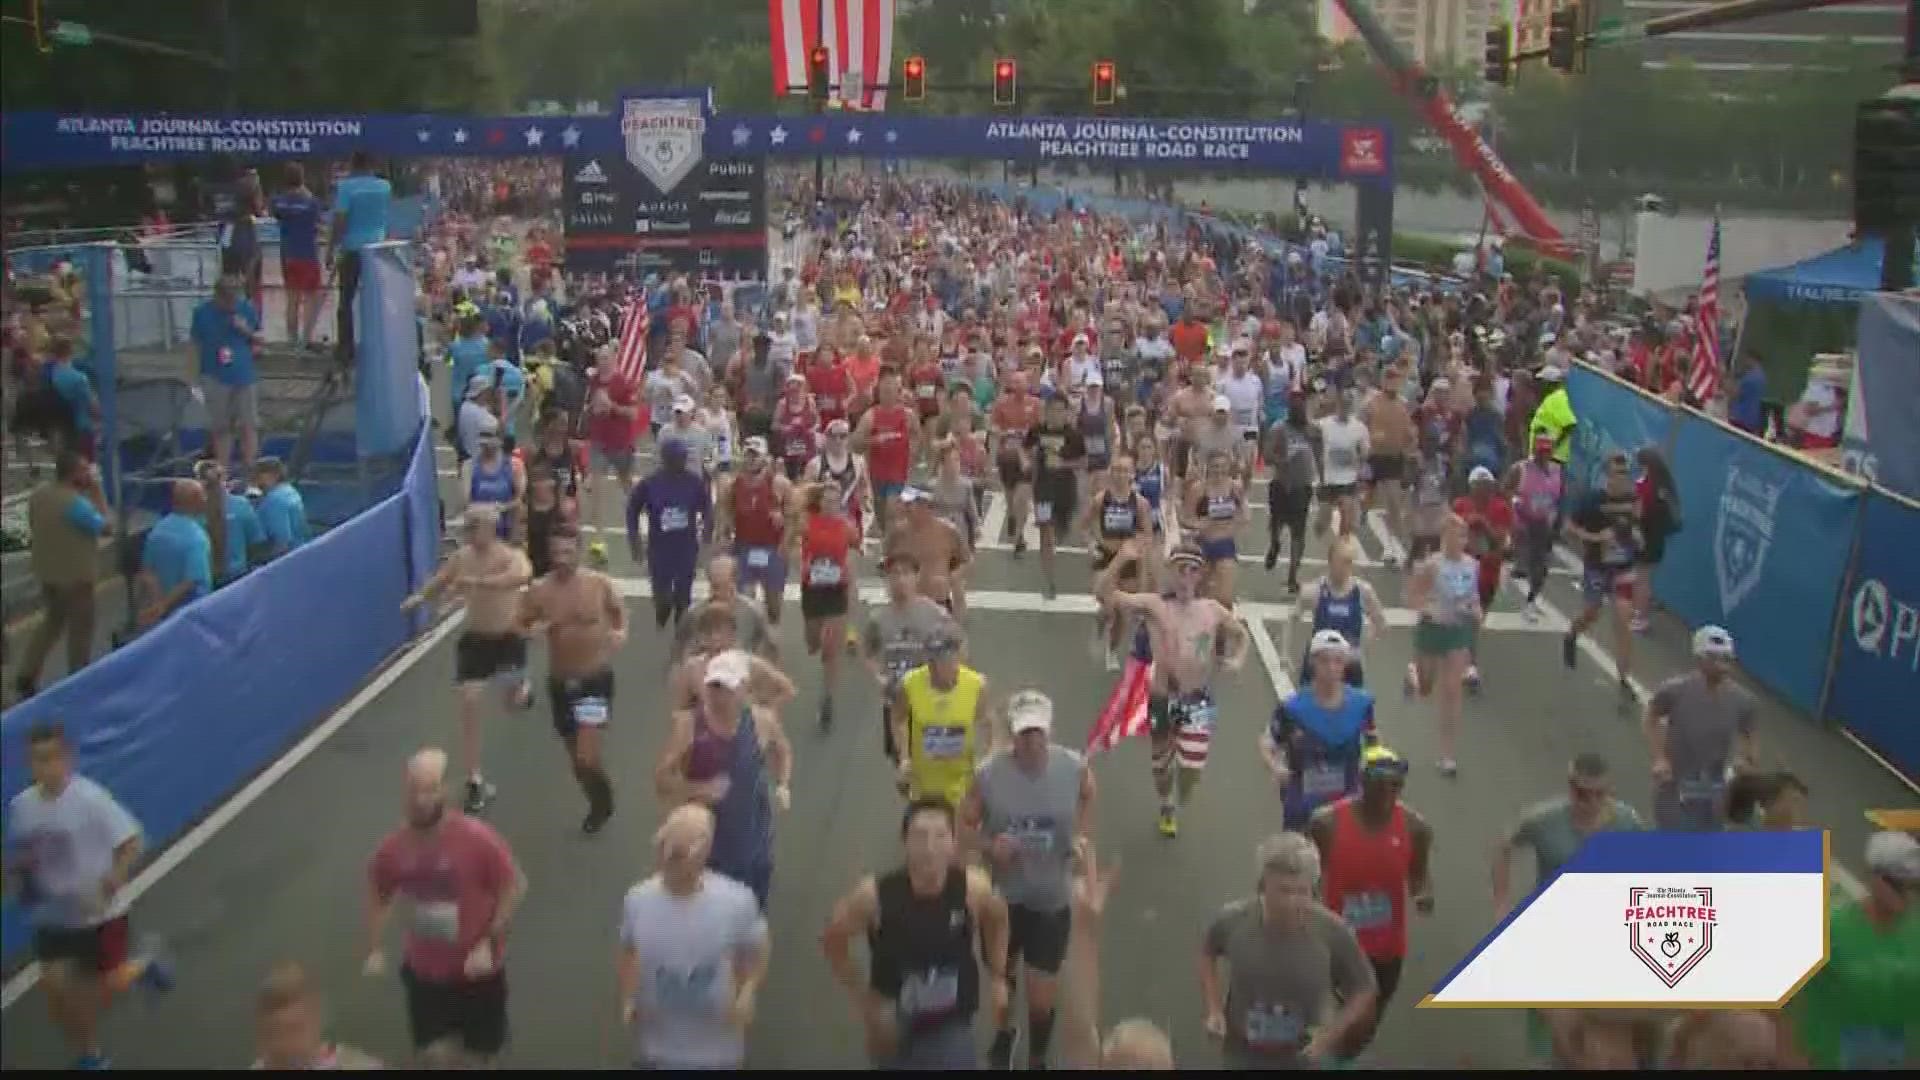 This is Atlanta at its best and most resilient. The 53rd AJC Peachtree Road Race, from start to finish.